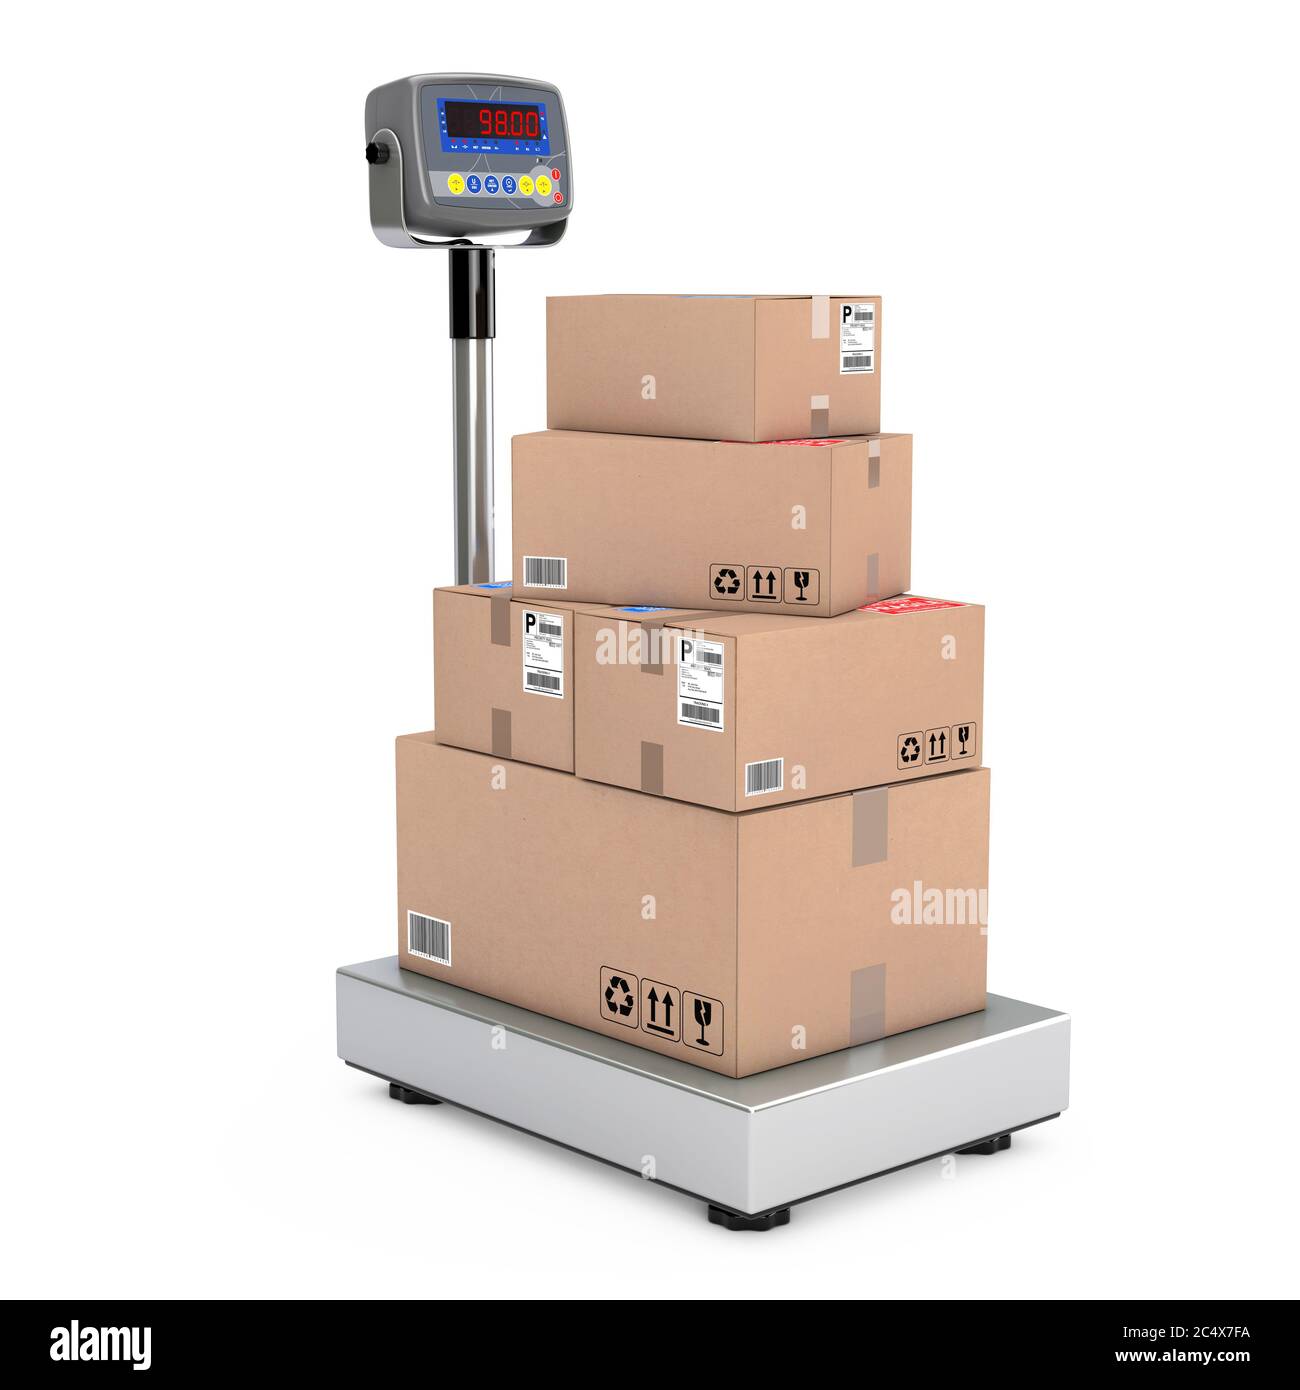 https://c8.alamy.com/comp/2C4X7FA/stacked-cardboard-boxes-parcels-over-warehouse-digital-cargo-scales-on-a-white-background-3d-rendering-2C4X7FA.jpg